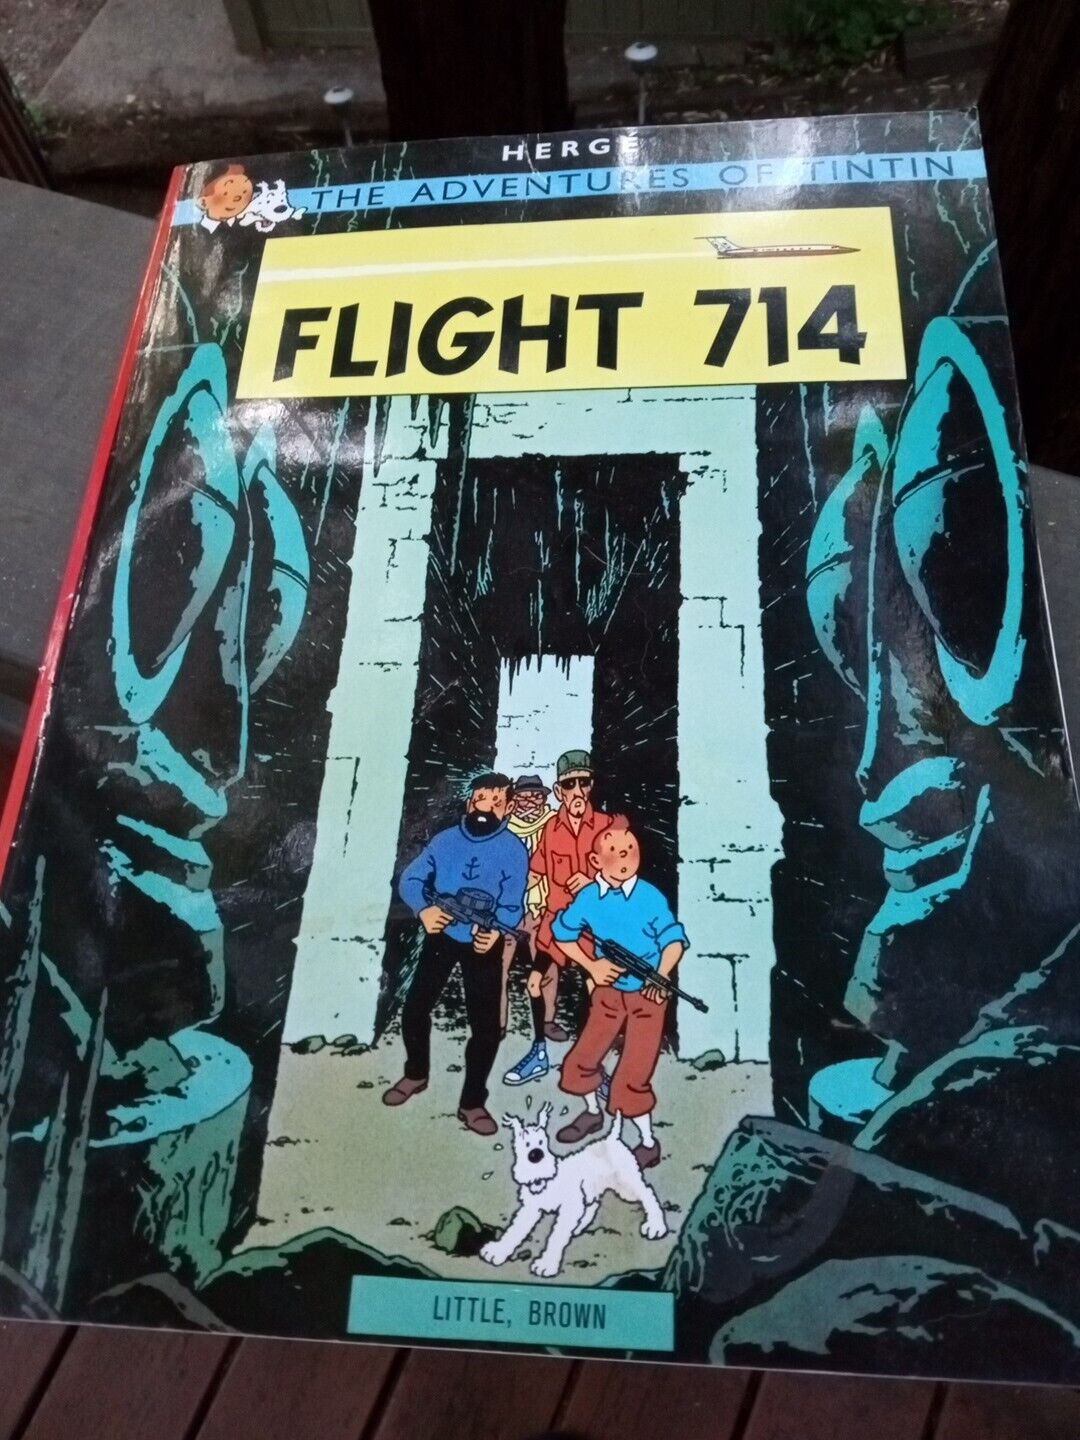 Vintage Adventures of Tintin Flight 714 by Herge Paperback Book 1975- In English